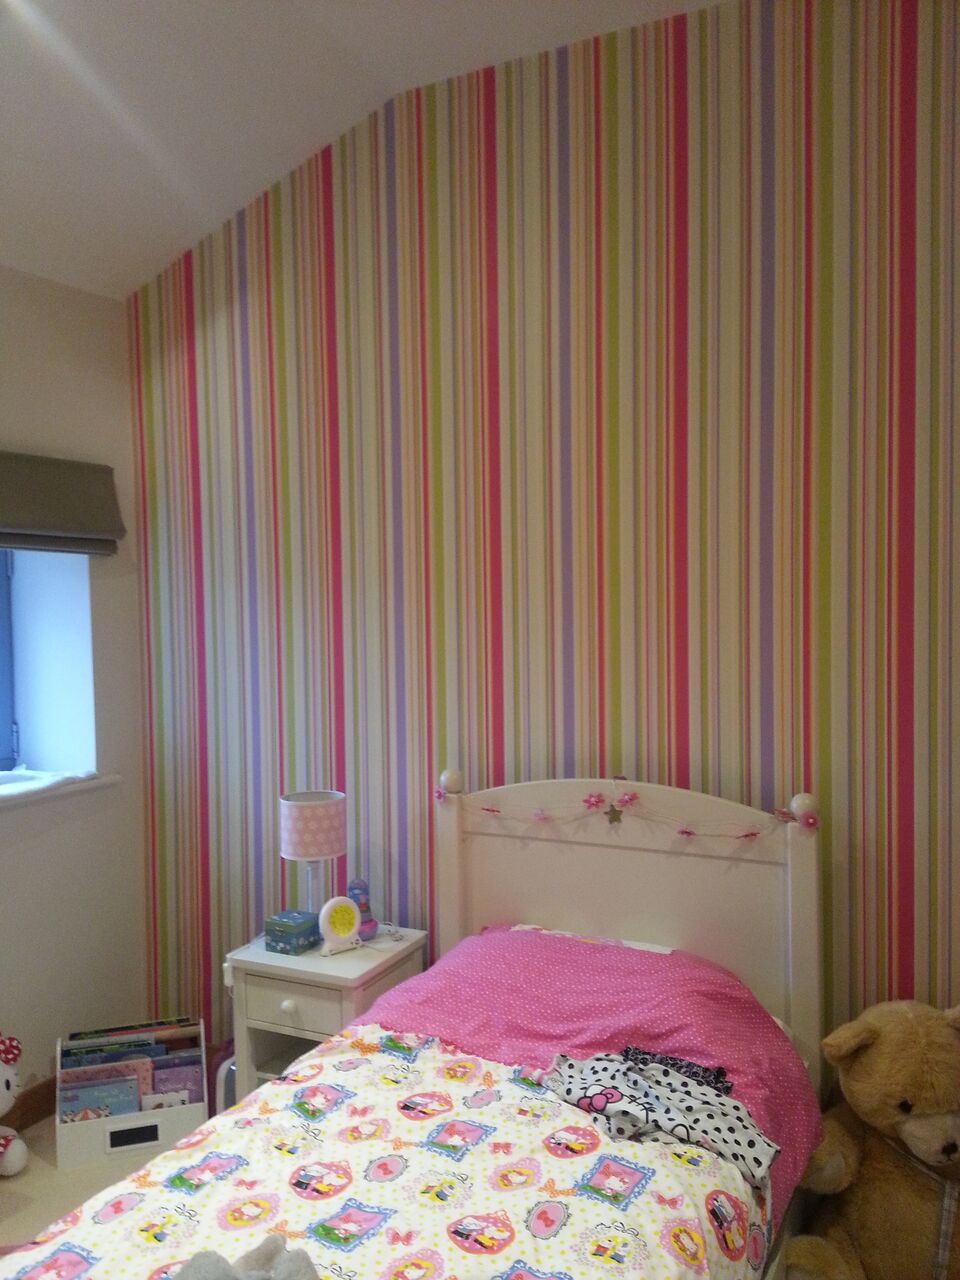 striped feature wall pink green purple